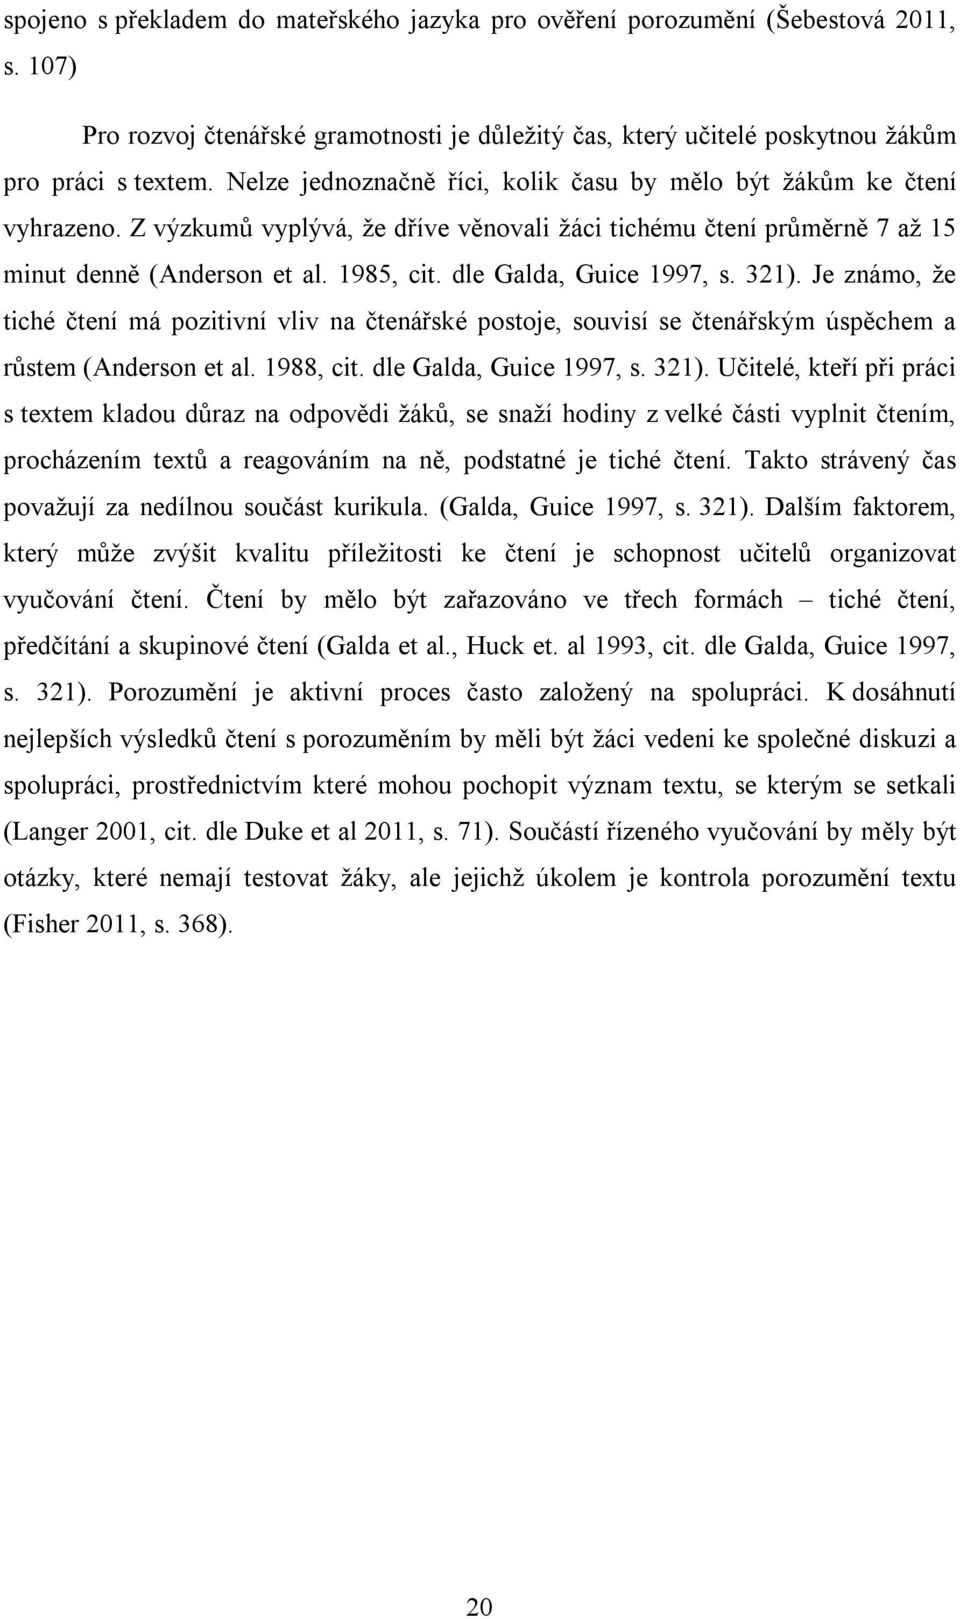 dle Galda, Guice 1997, s. 321).